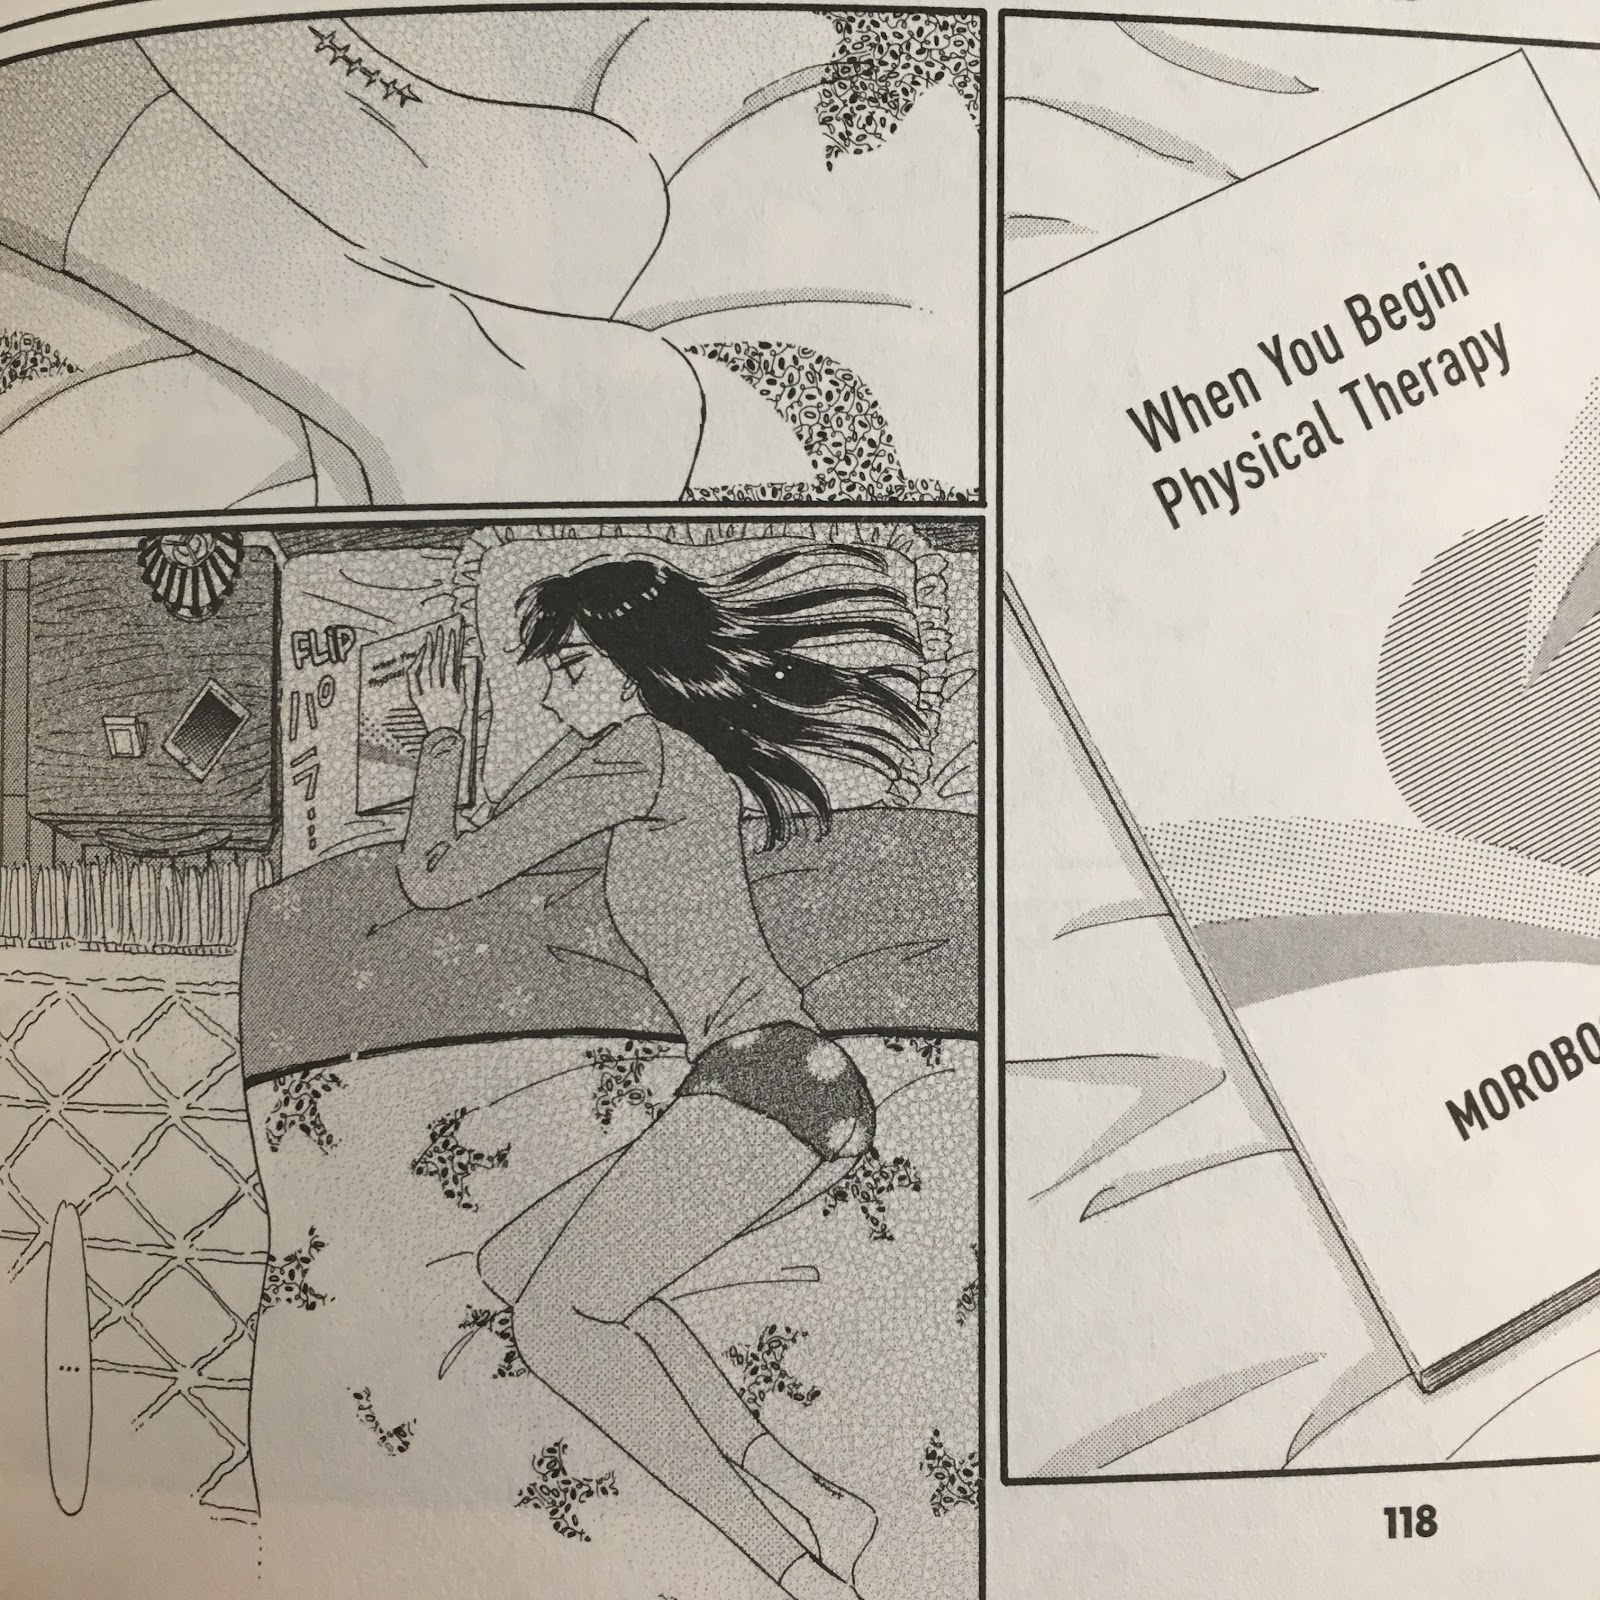 Akira lying in bed looking at a booklet called "When you begin physical therapy"